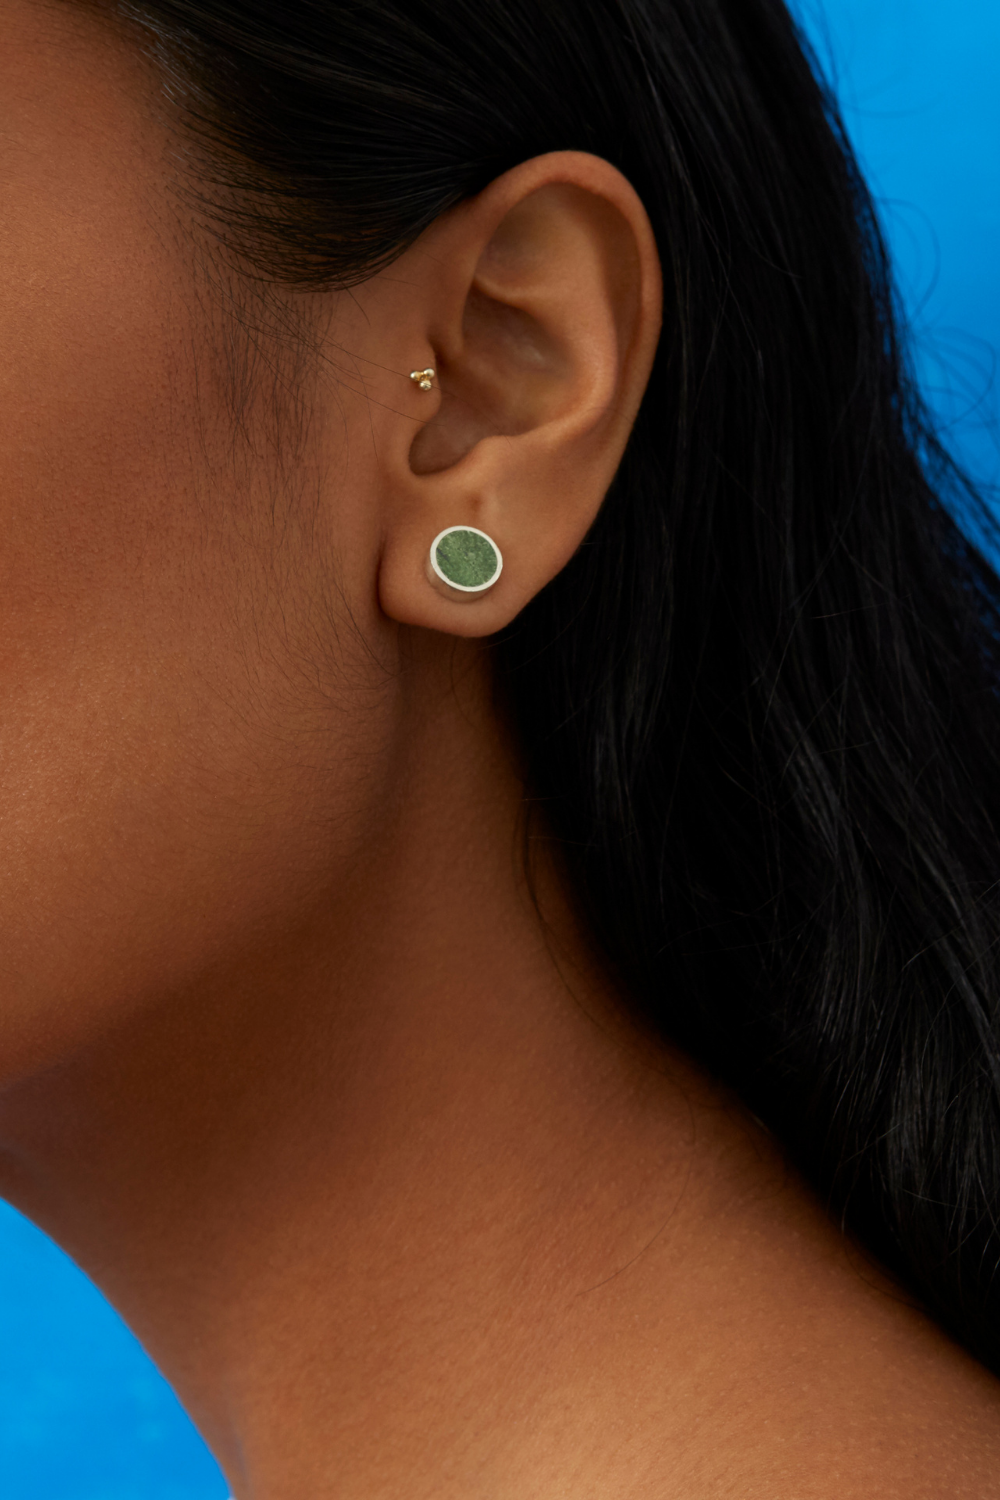 Artisan & Fox - Jewellery - MAH Silver Earstuds in Bamiyan Turquoise - Handcrafted in Afghanistan